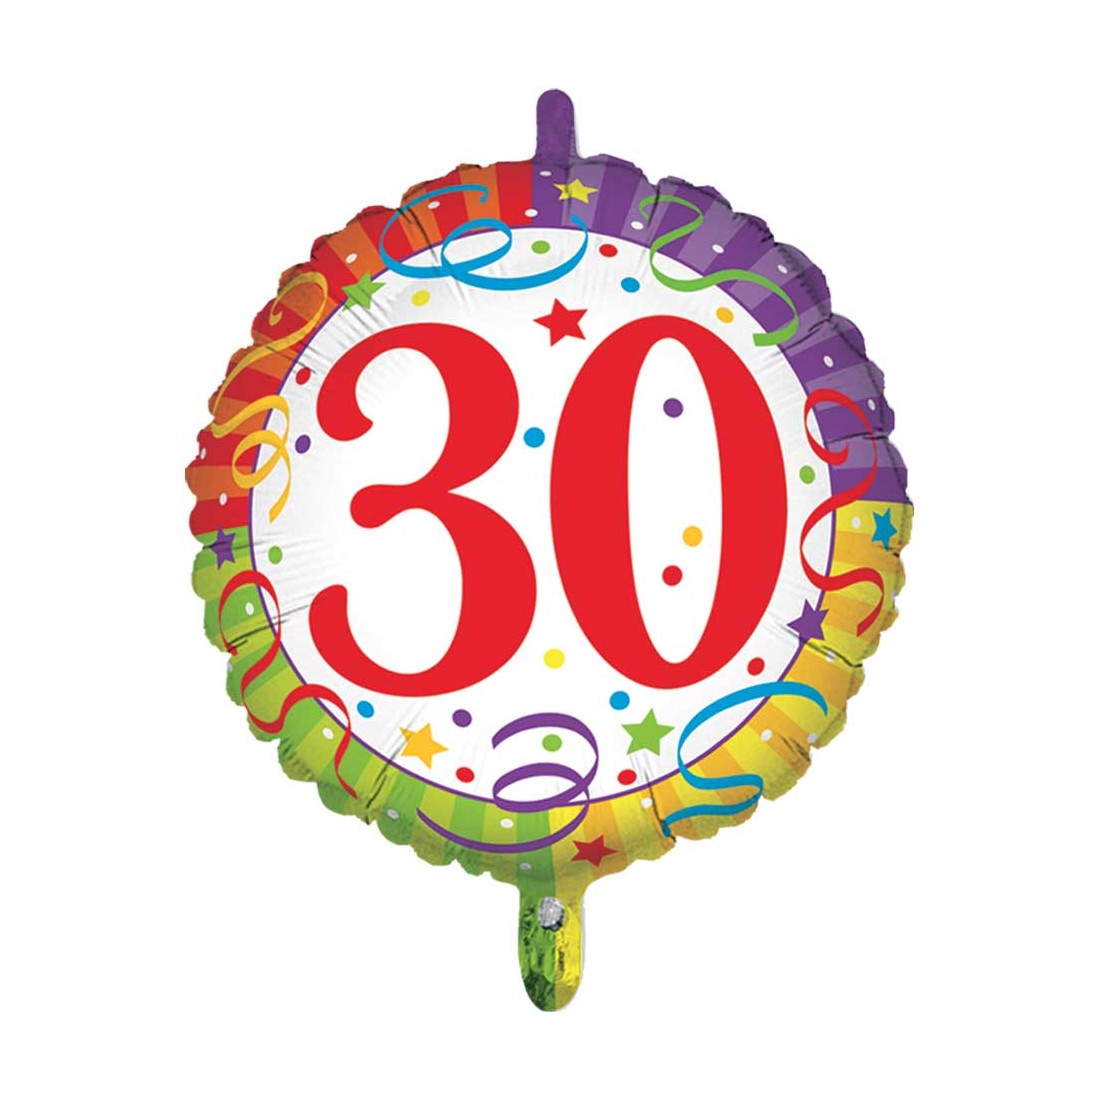 MYLAR 45 CM 30 COMPLEANNO